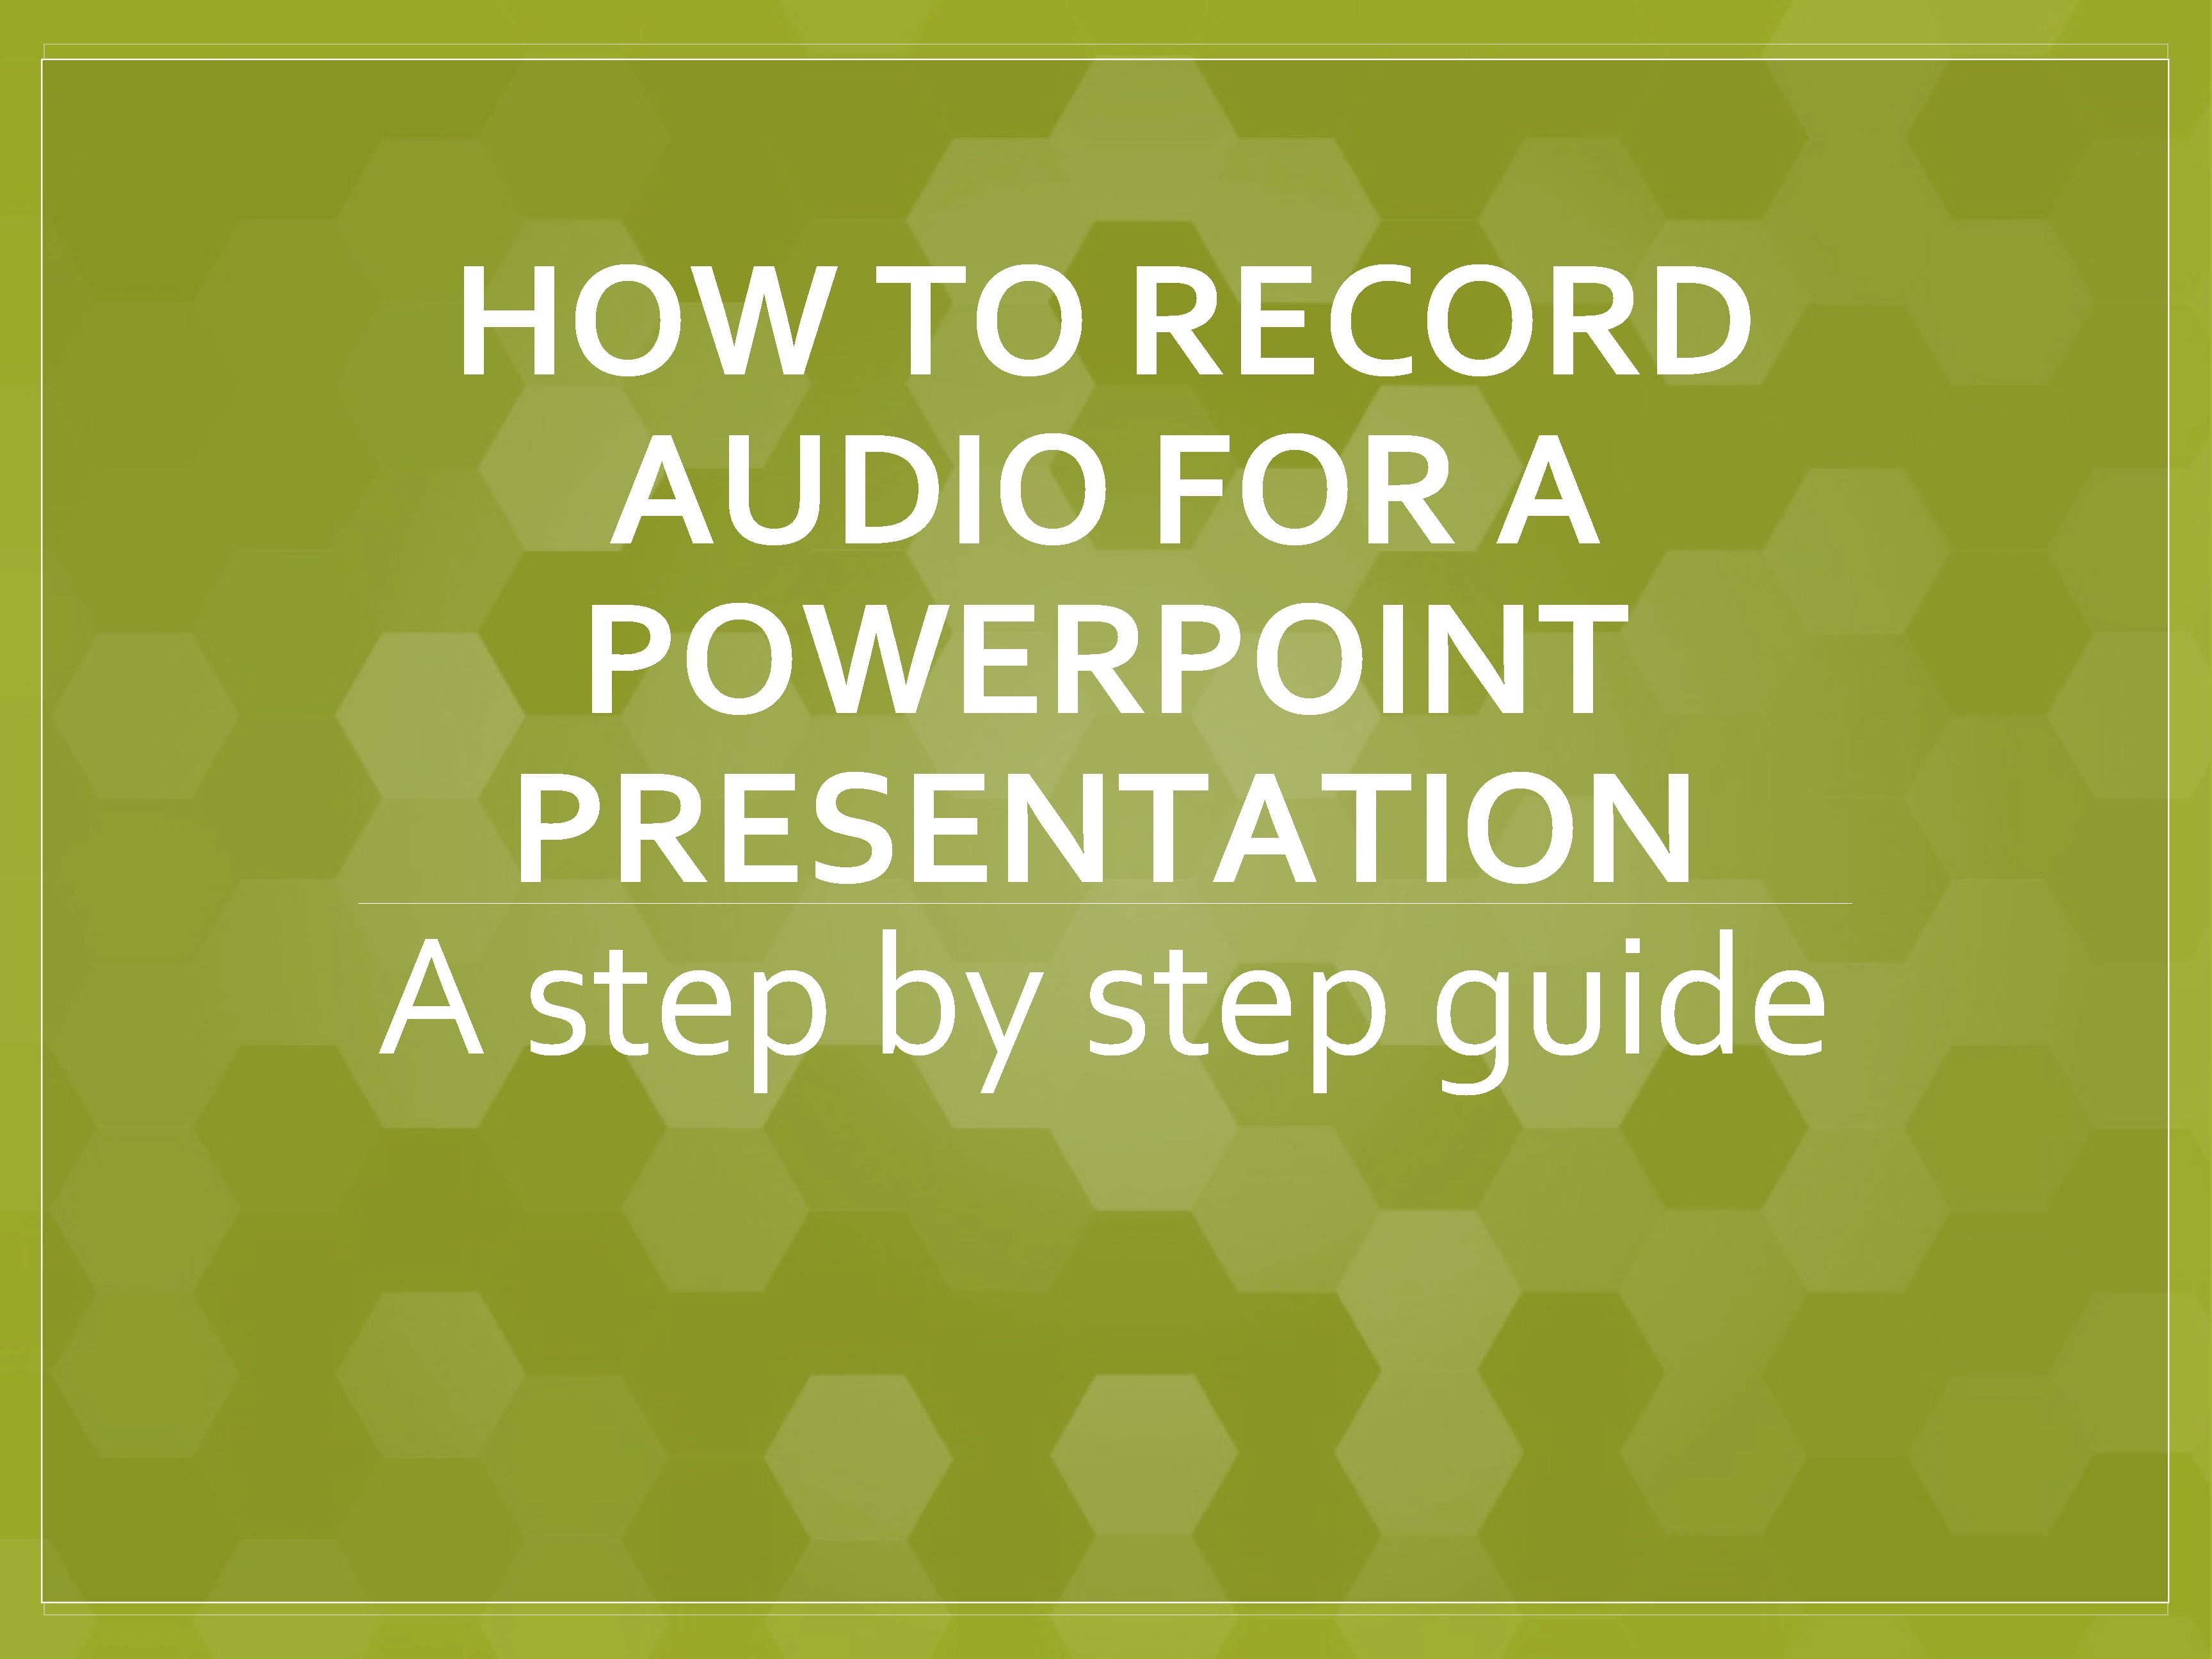 HOW TO RECORD AUDIO FOR A POWERPOINT PRESENTATION A step by step guide 